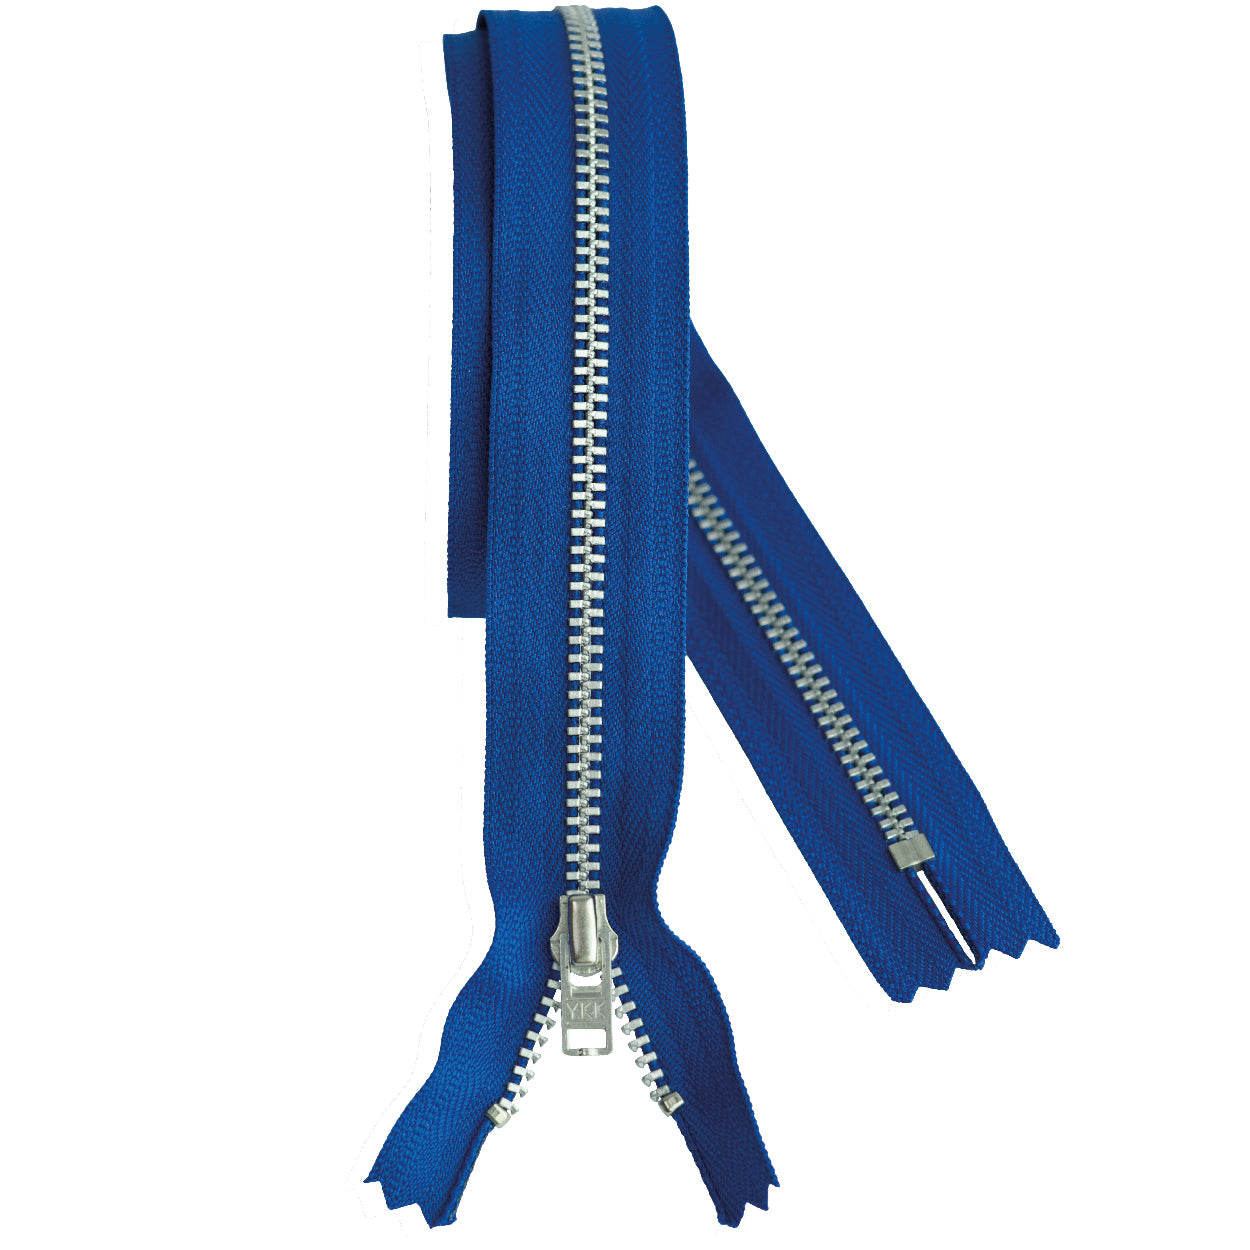 YKK silver tooth Metal Dress Zips - Royal Blue from Jaycotts Sewing Supplies